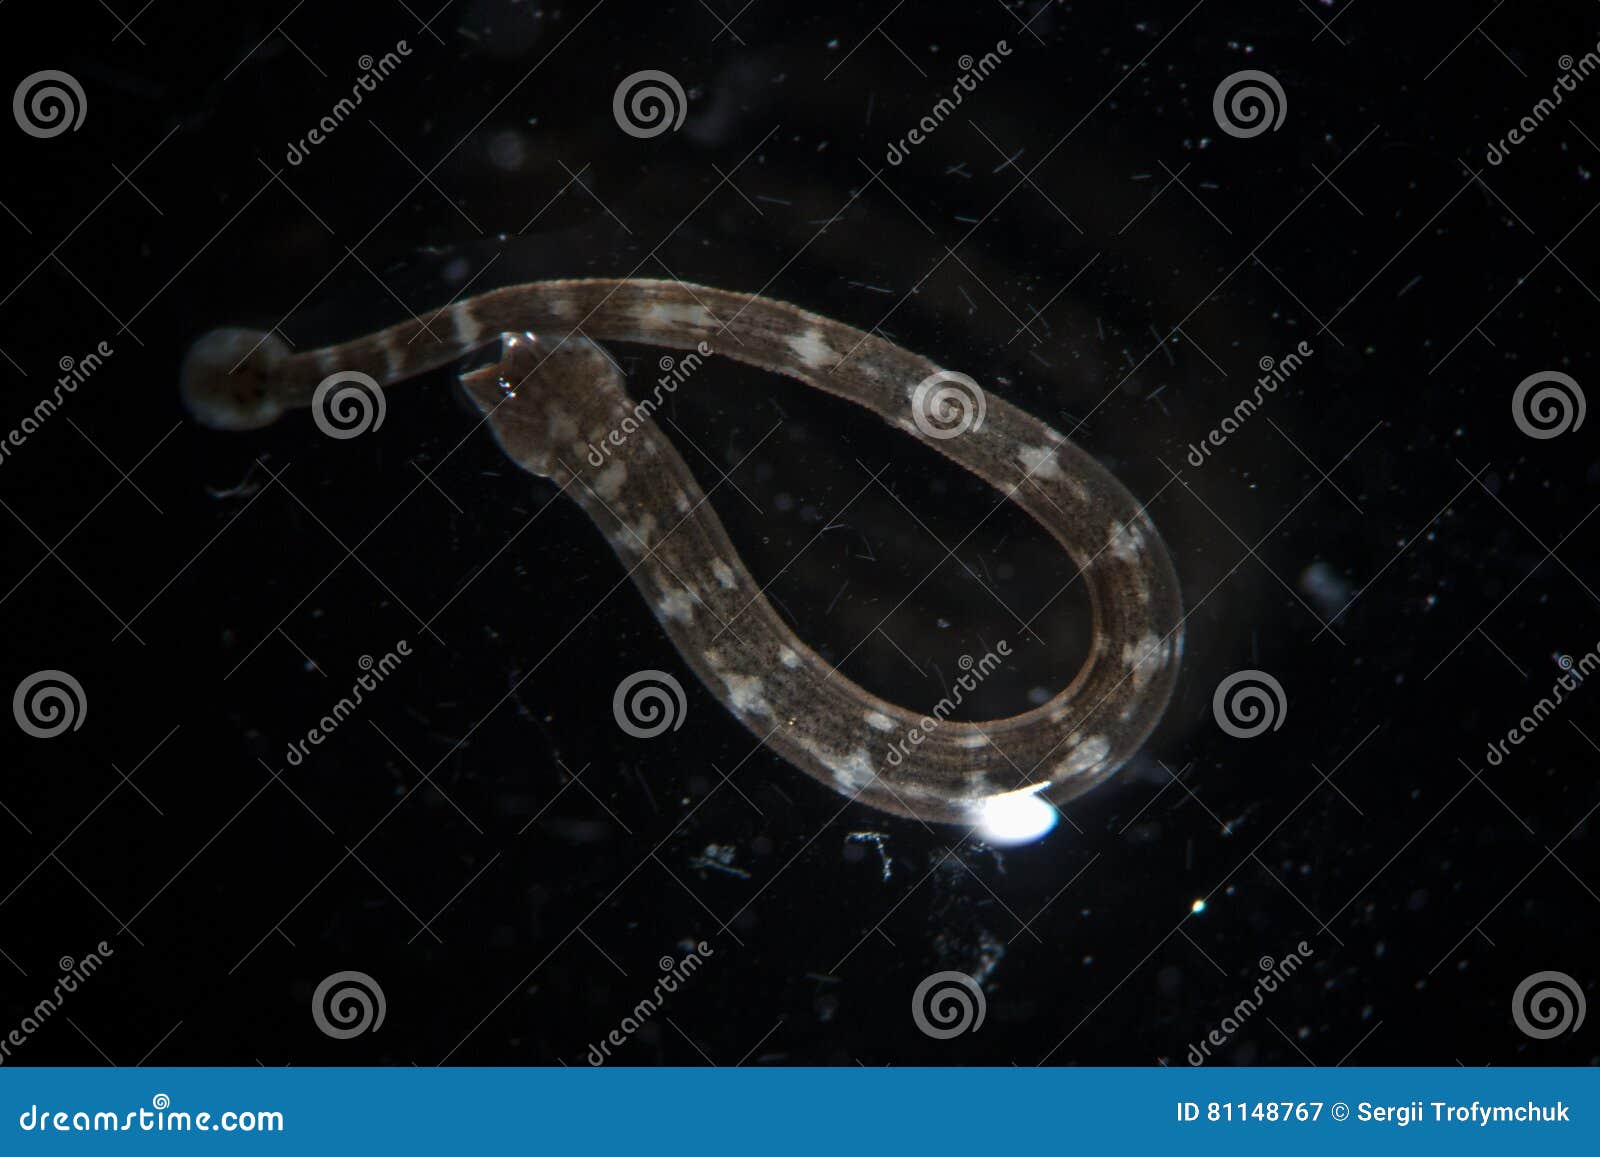 freshwater leech piscicola geometra by microscope. parasite, disease of fish. hydrobiology